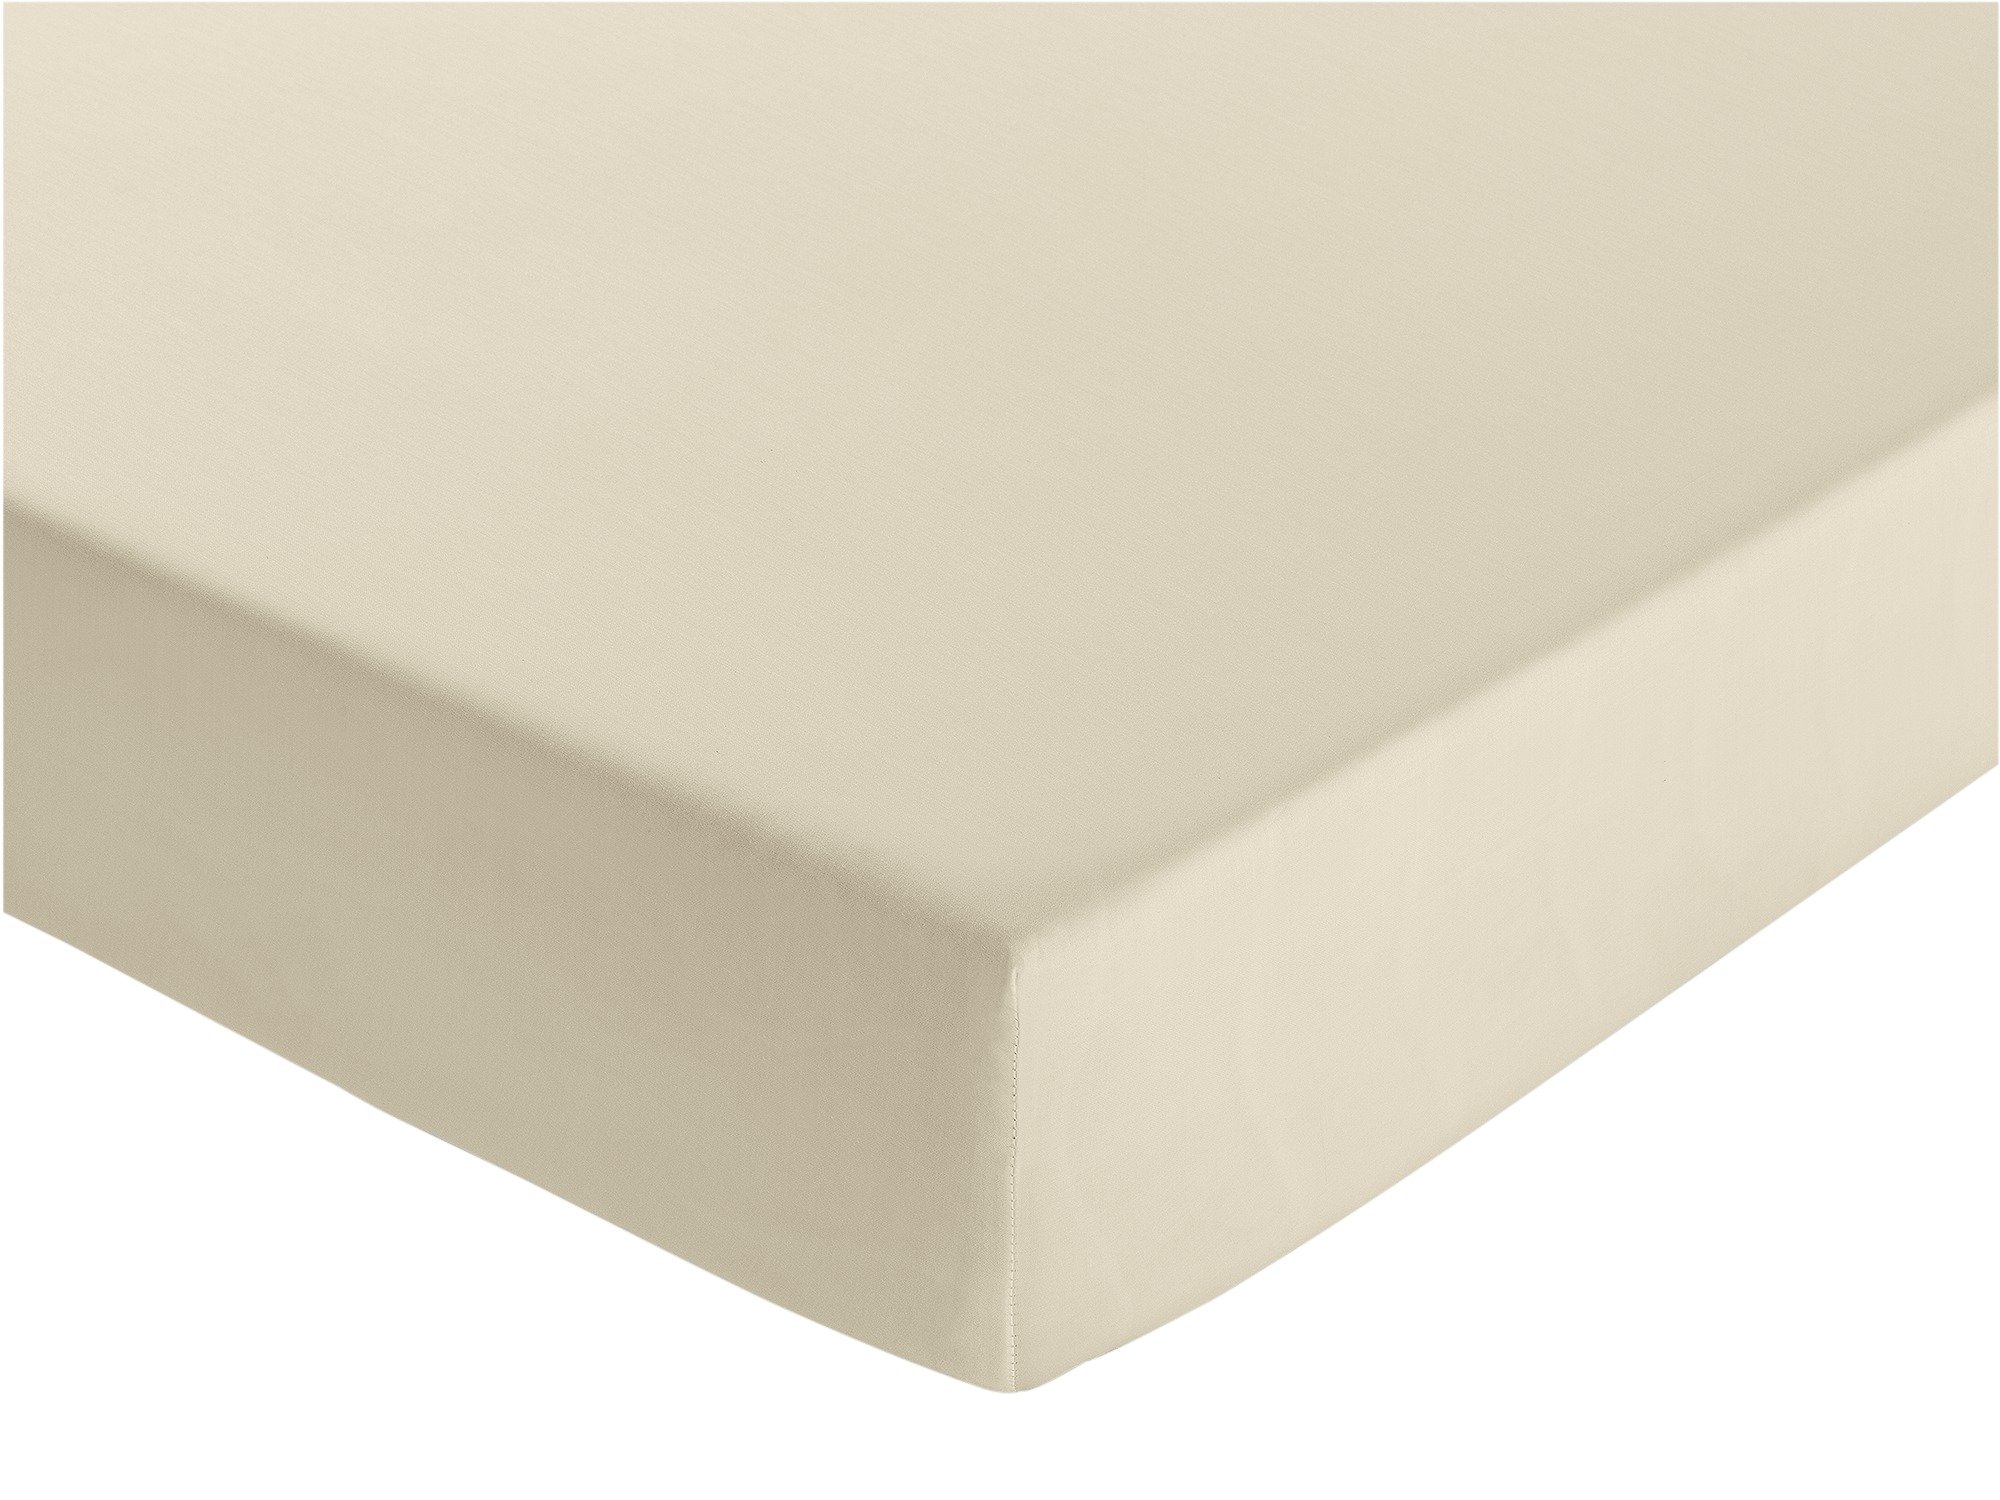 Argos Home 100% Cotton Ivory Deep Fitted Sheet - Kingsize